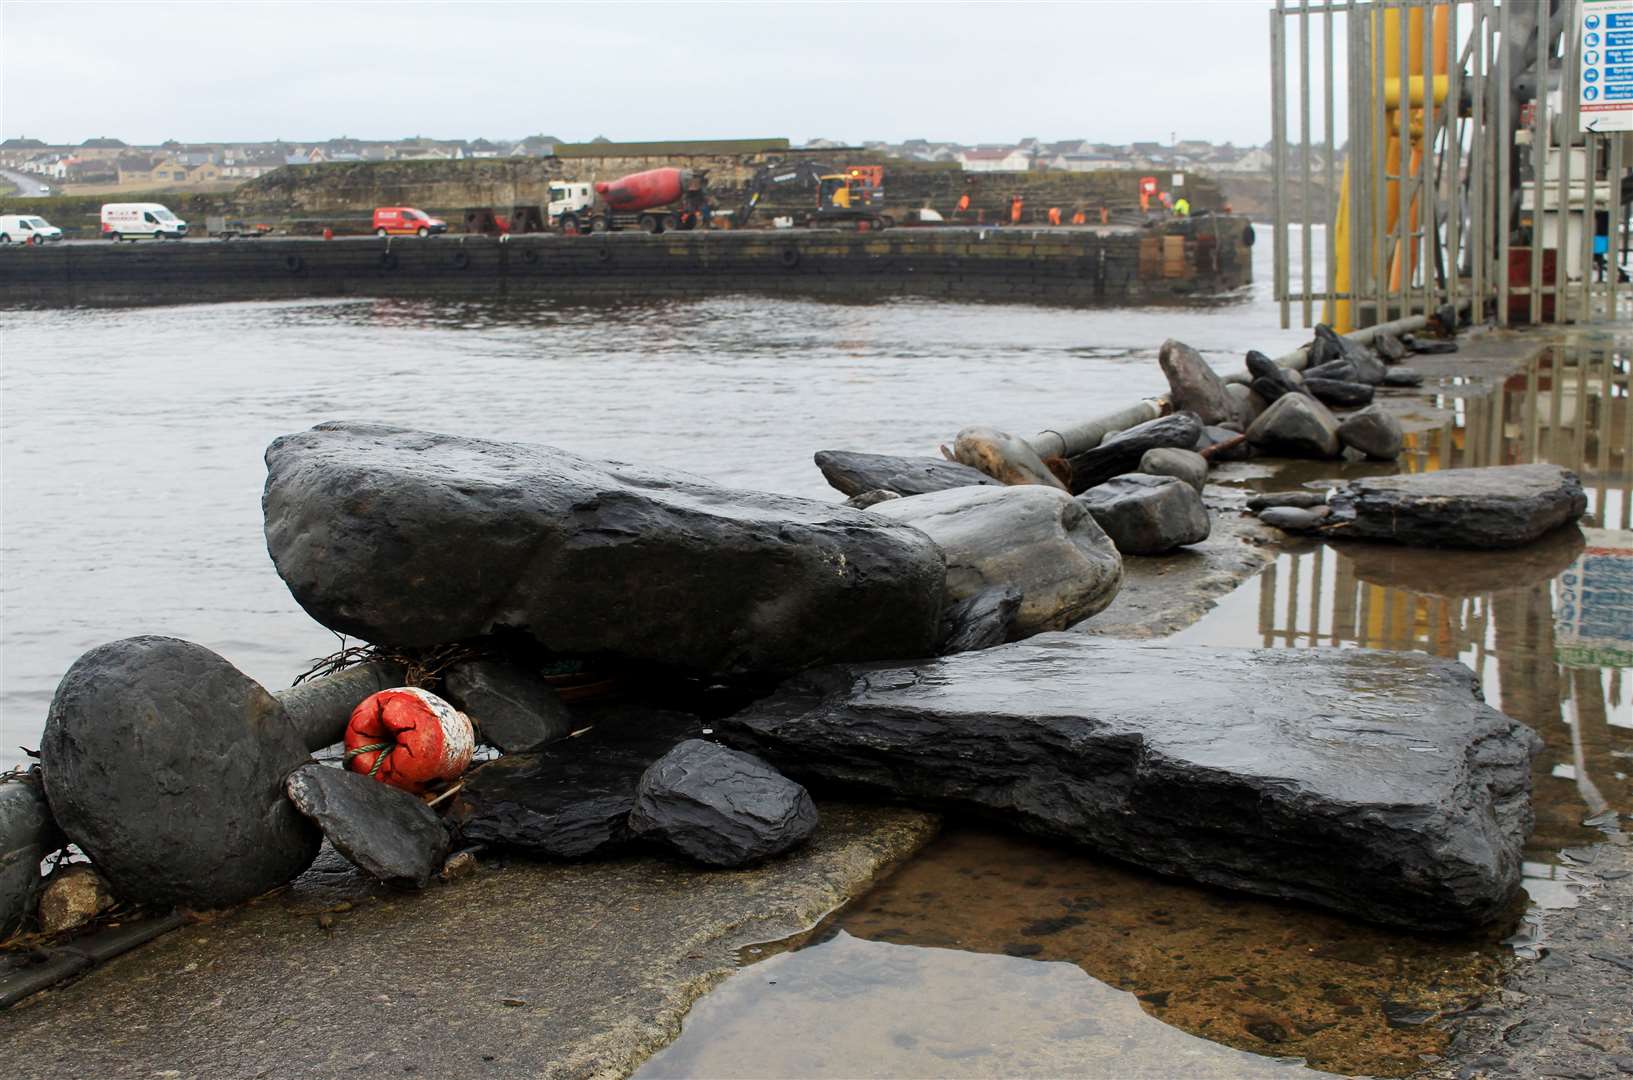 Large rocks thrown up by recent stormy weather, while (in the background) work continues on the emergency stabilisation scheme. Picture: Alan Hendry